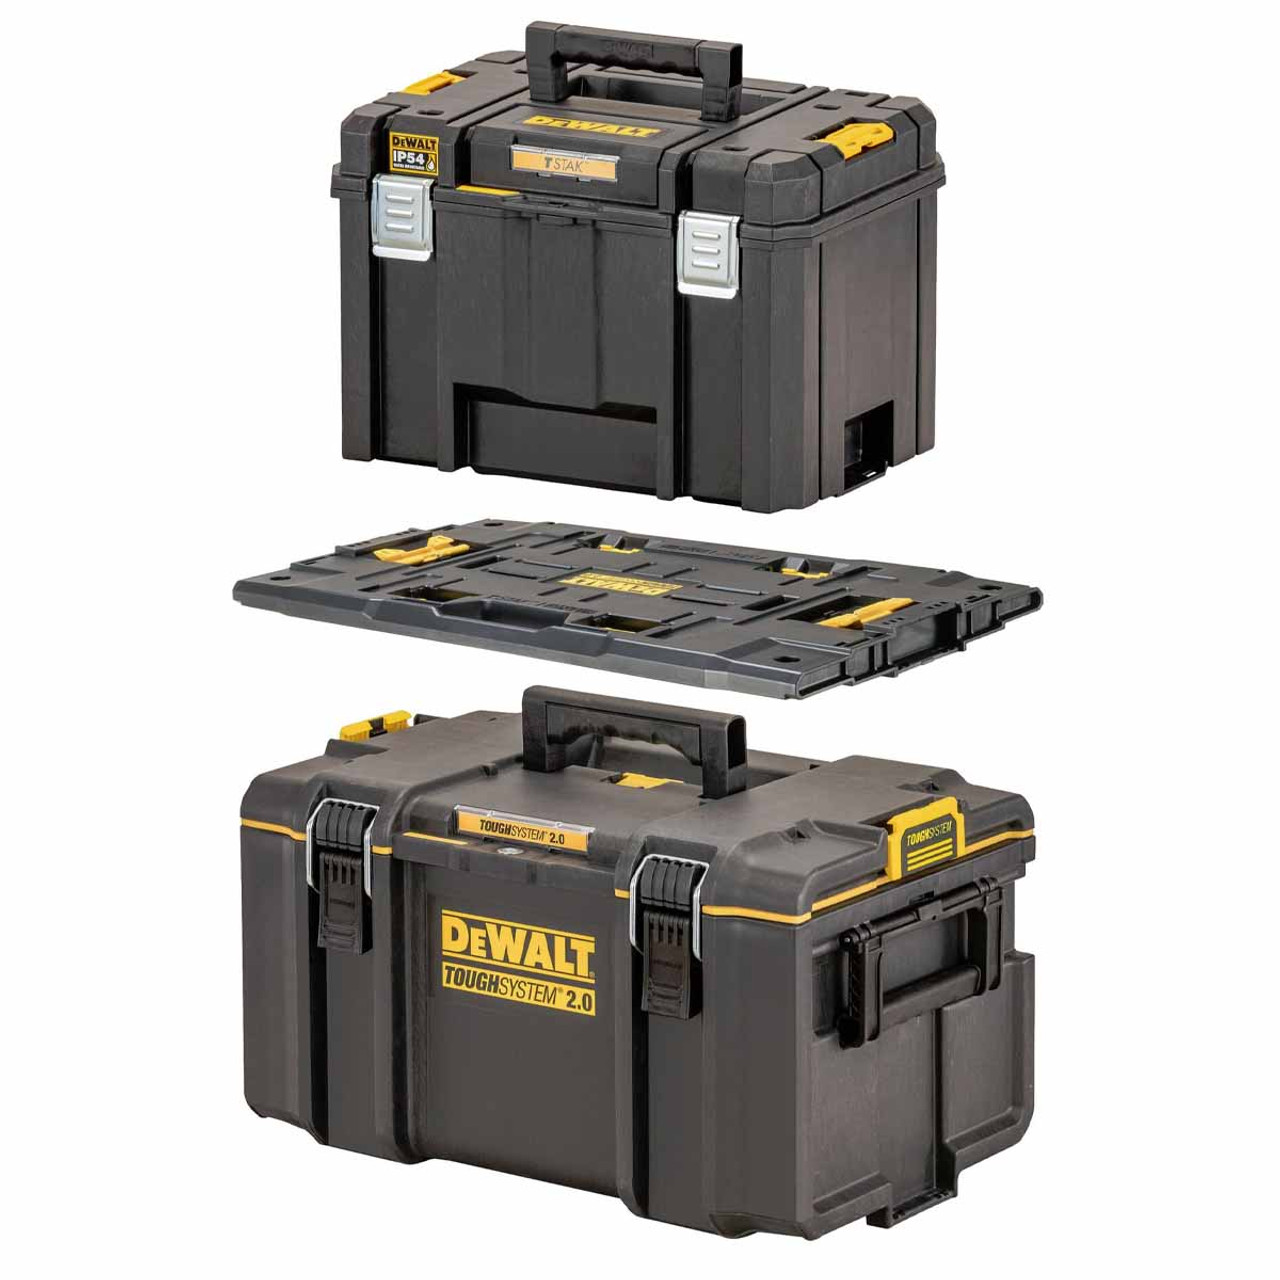 Connects TOUGHSYSTEM 2.0 products to DEWALT TSTAK™ modules